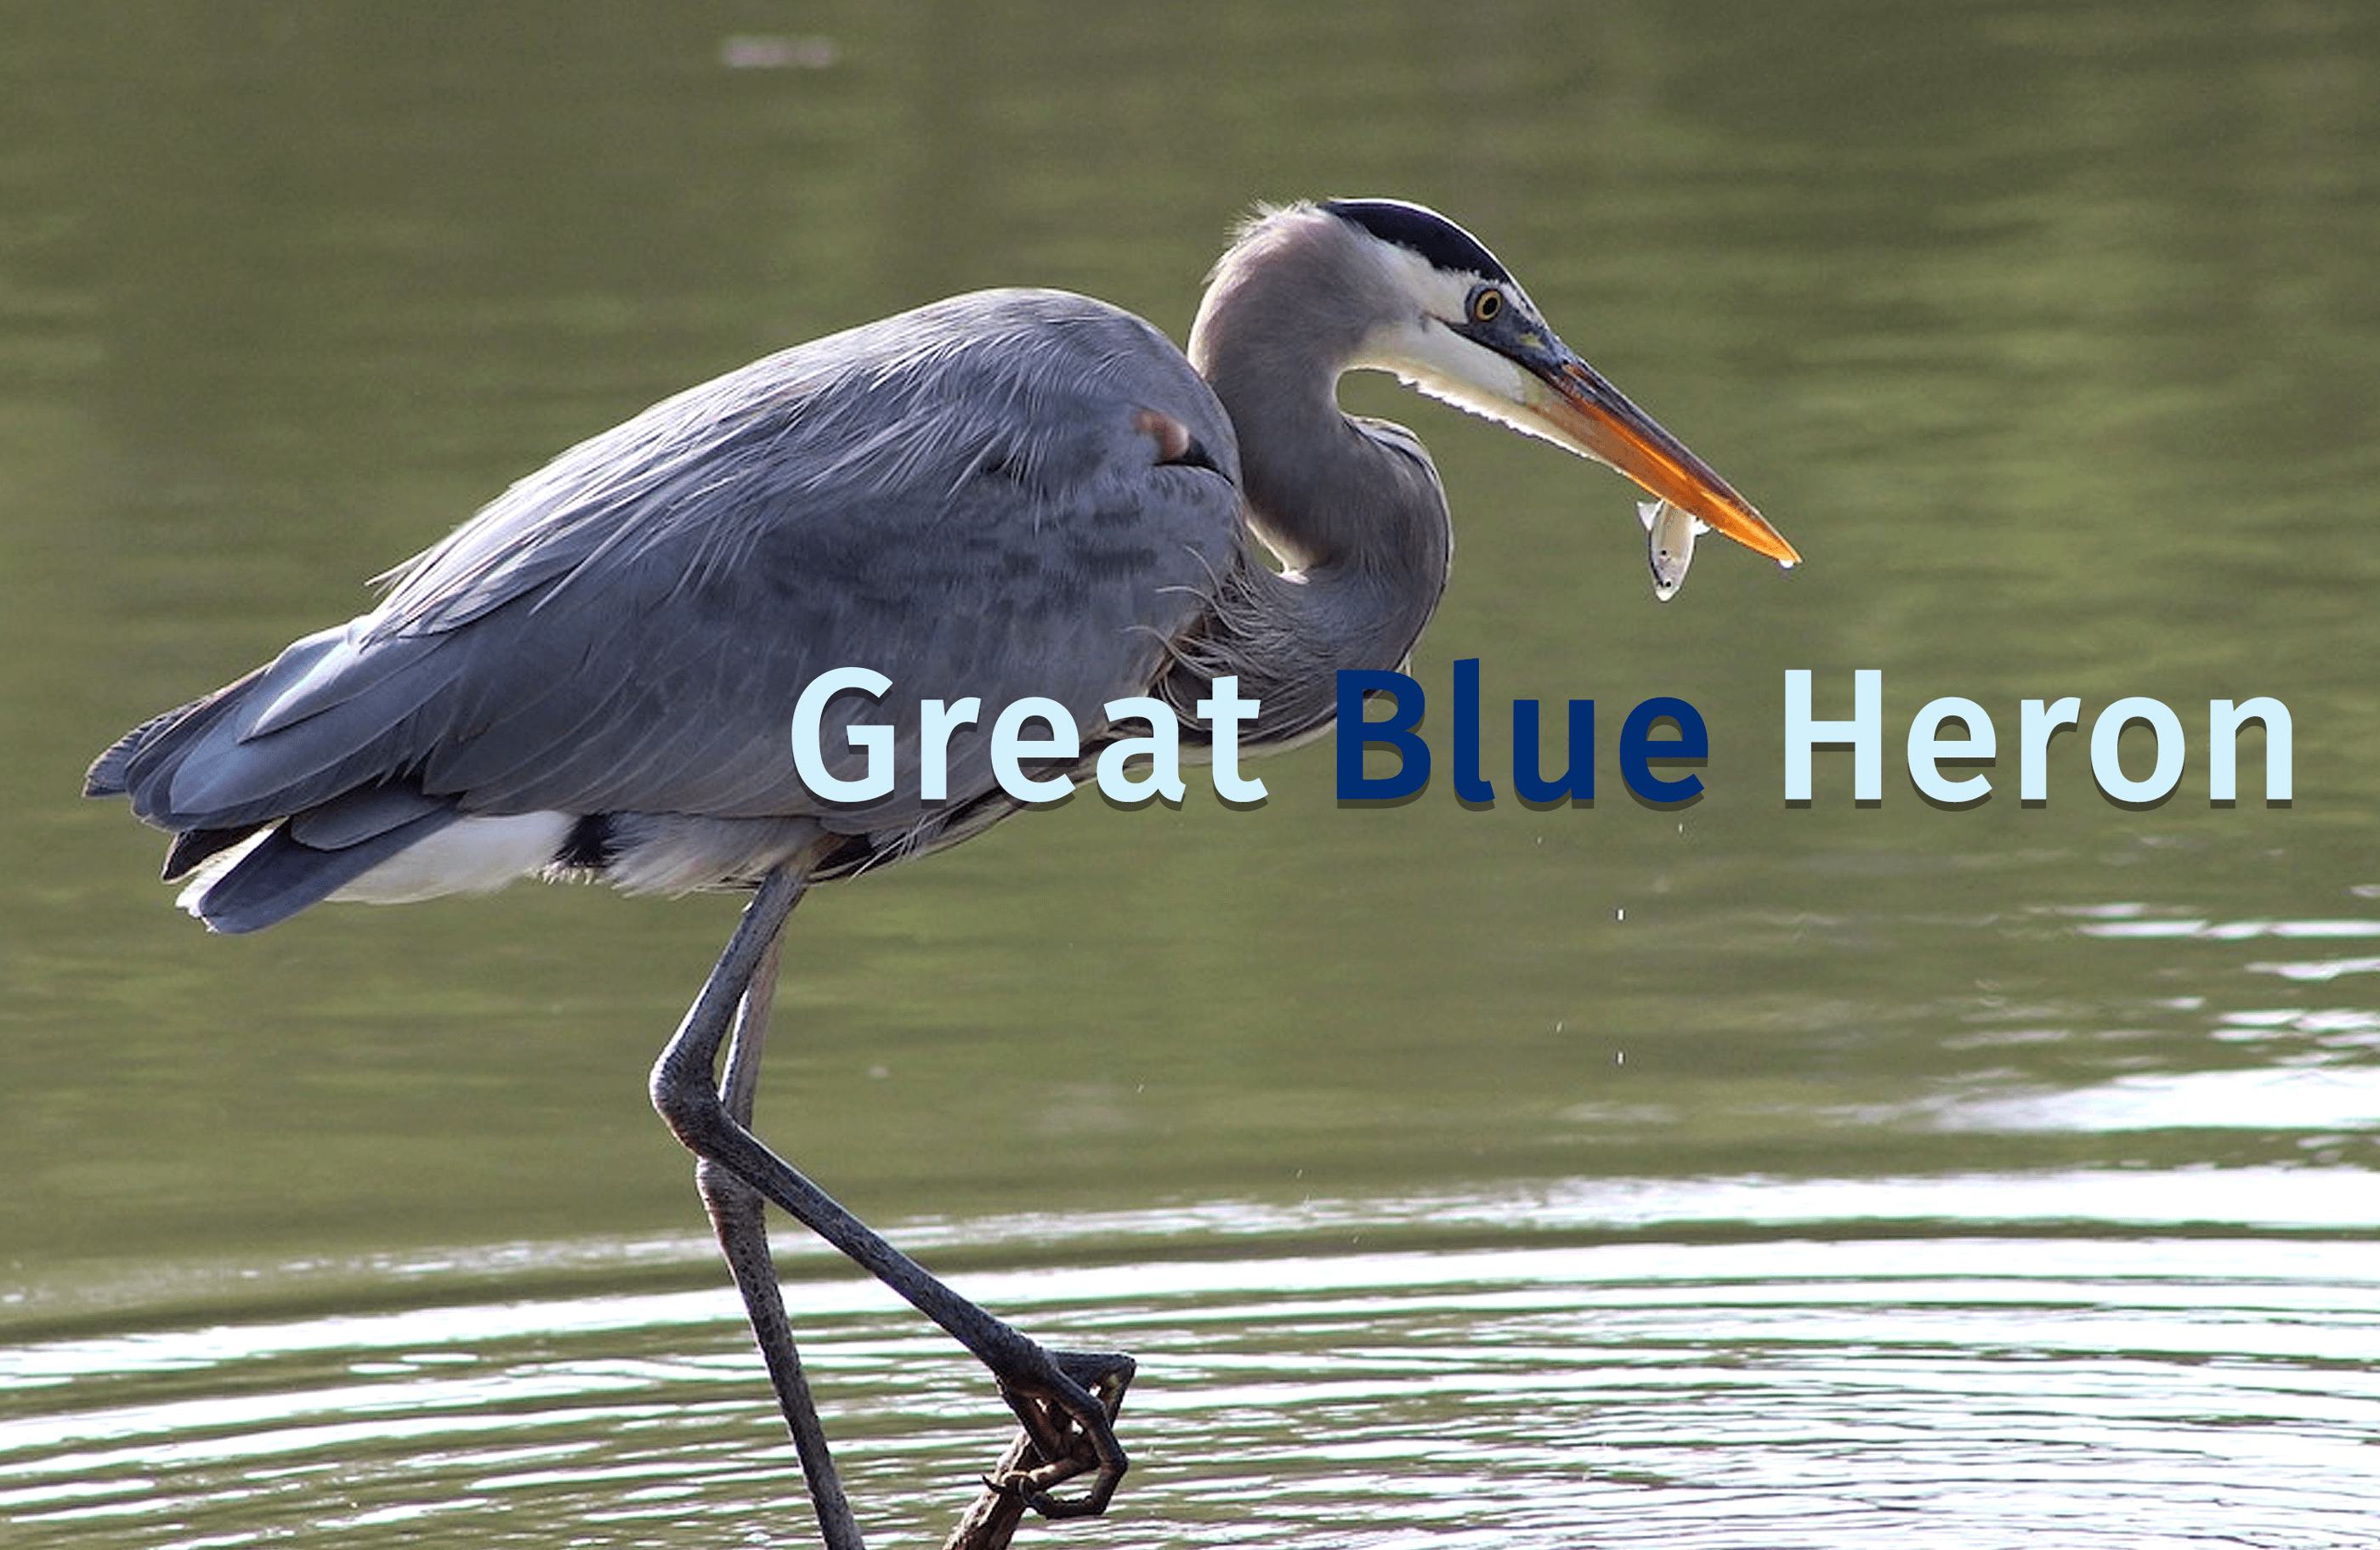 A blue Heron bird stands in a shallow pid iwth a little fish in hi mouth. The words Great Blue Heron are typed over the photo.